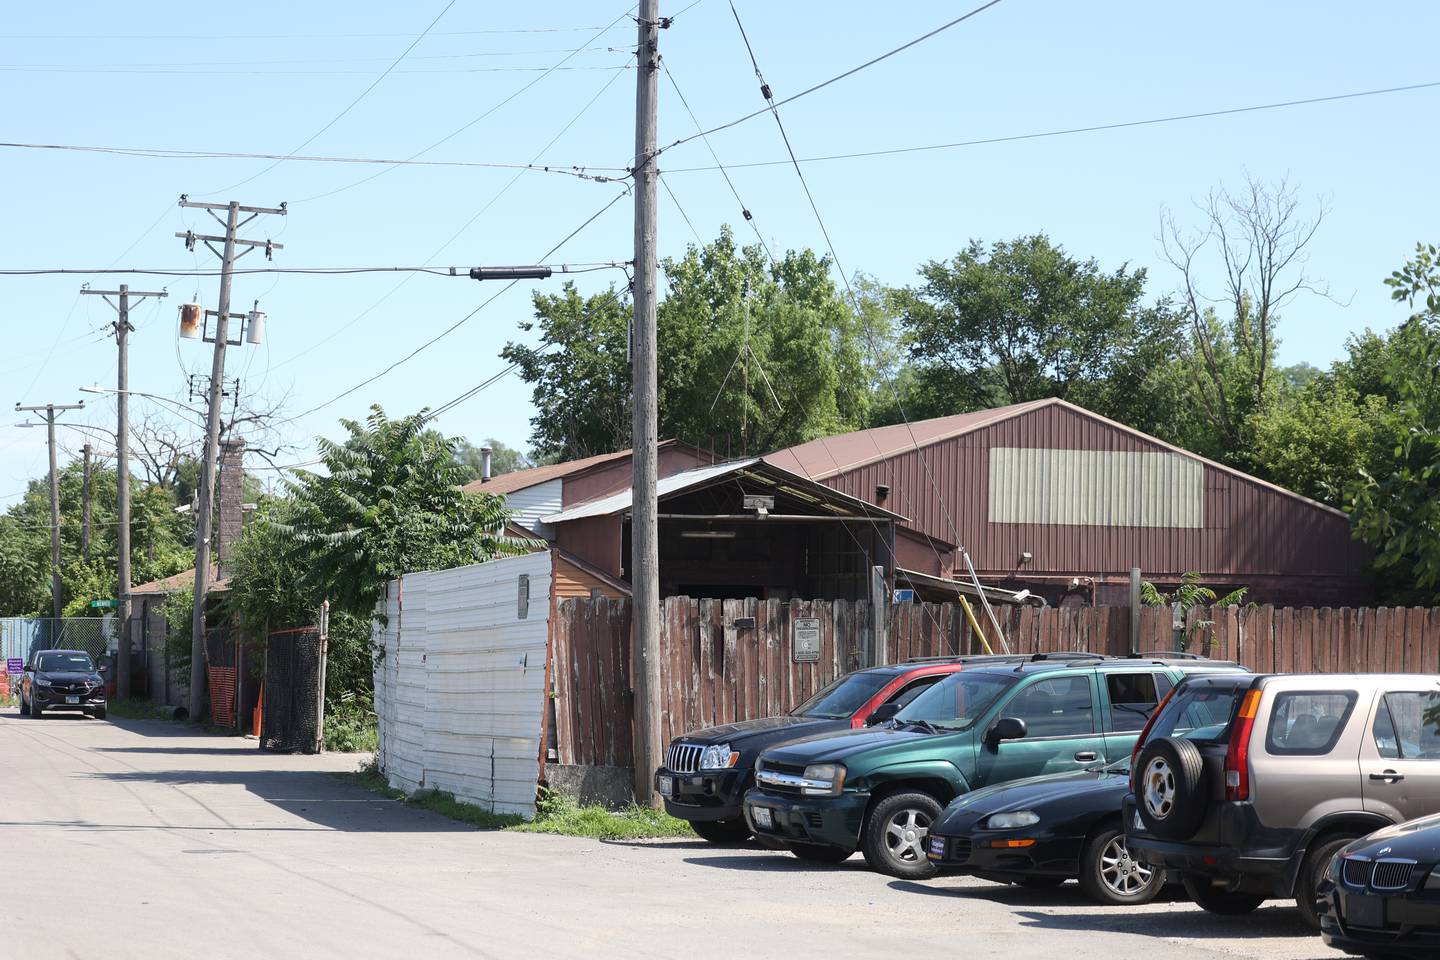 Berlinsky Scrap, a business that has been around for around a 100 years, is expected to be sold. Friday, July 22, 2022 in Joliet.